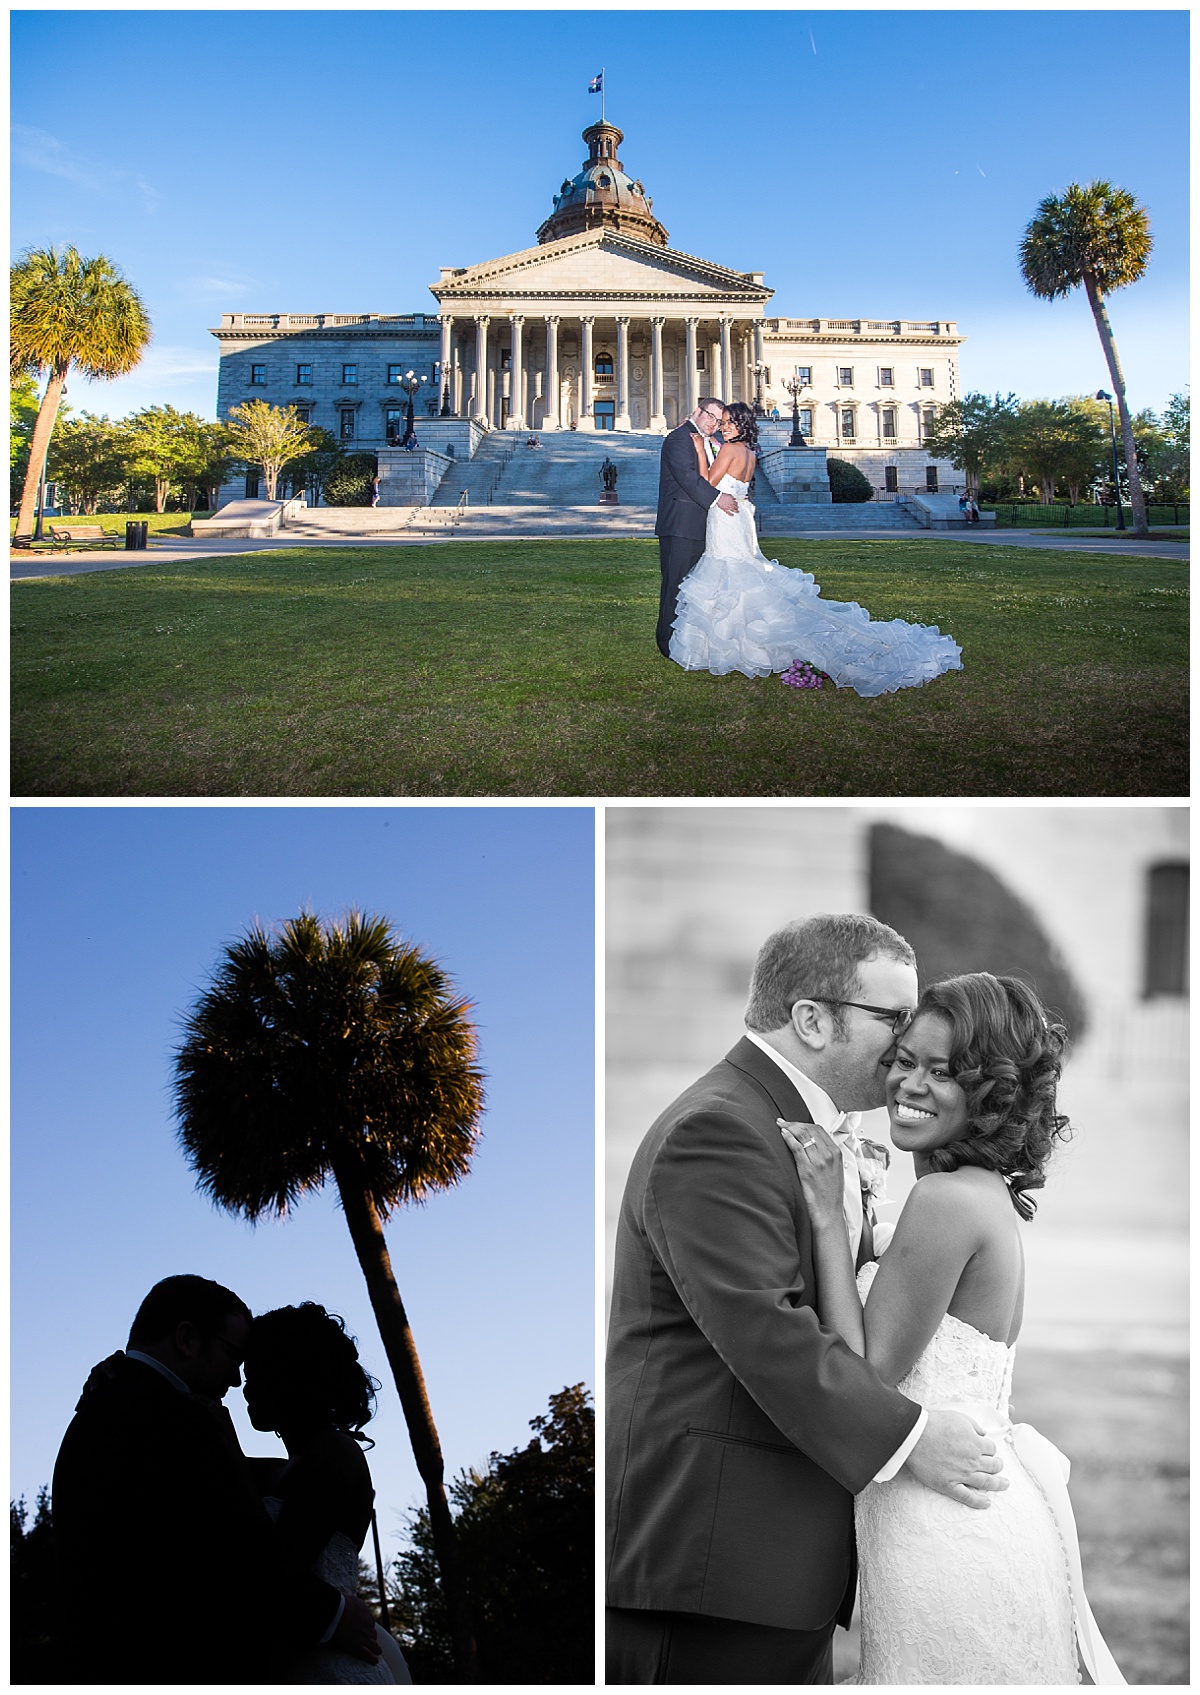 State House bride and groom wedding with palmetto tree